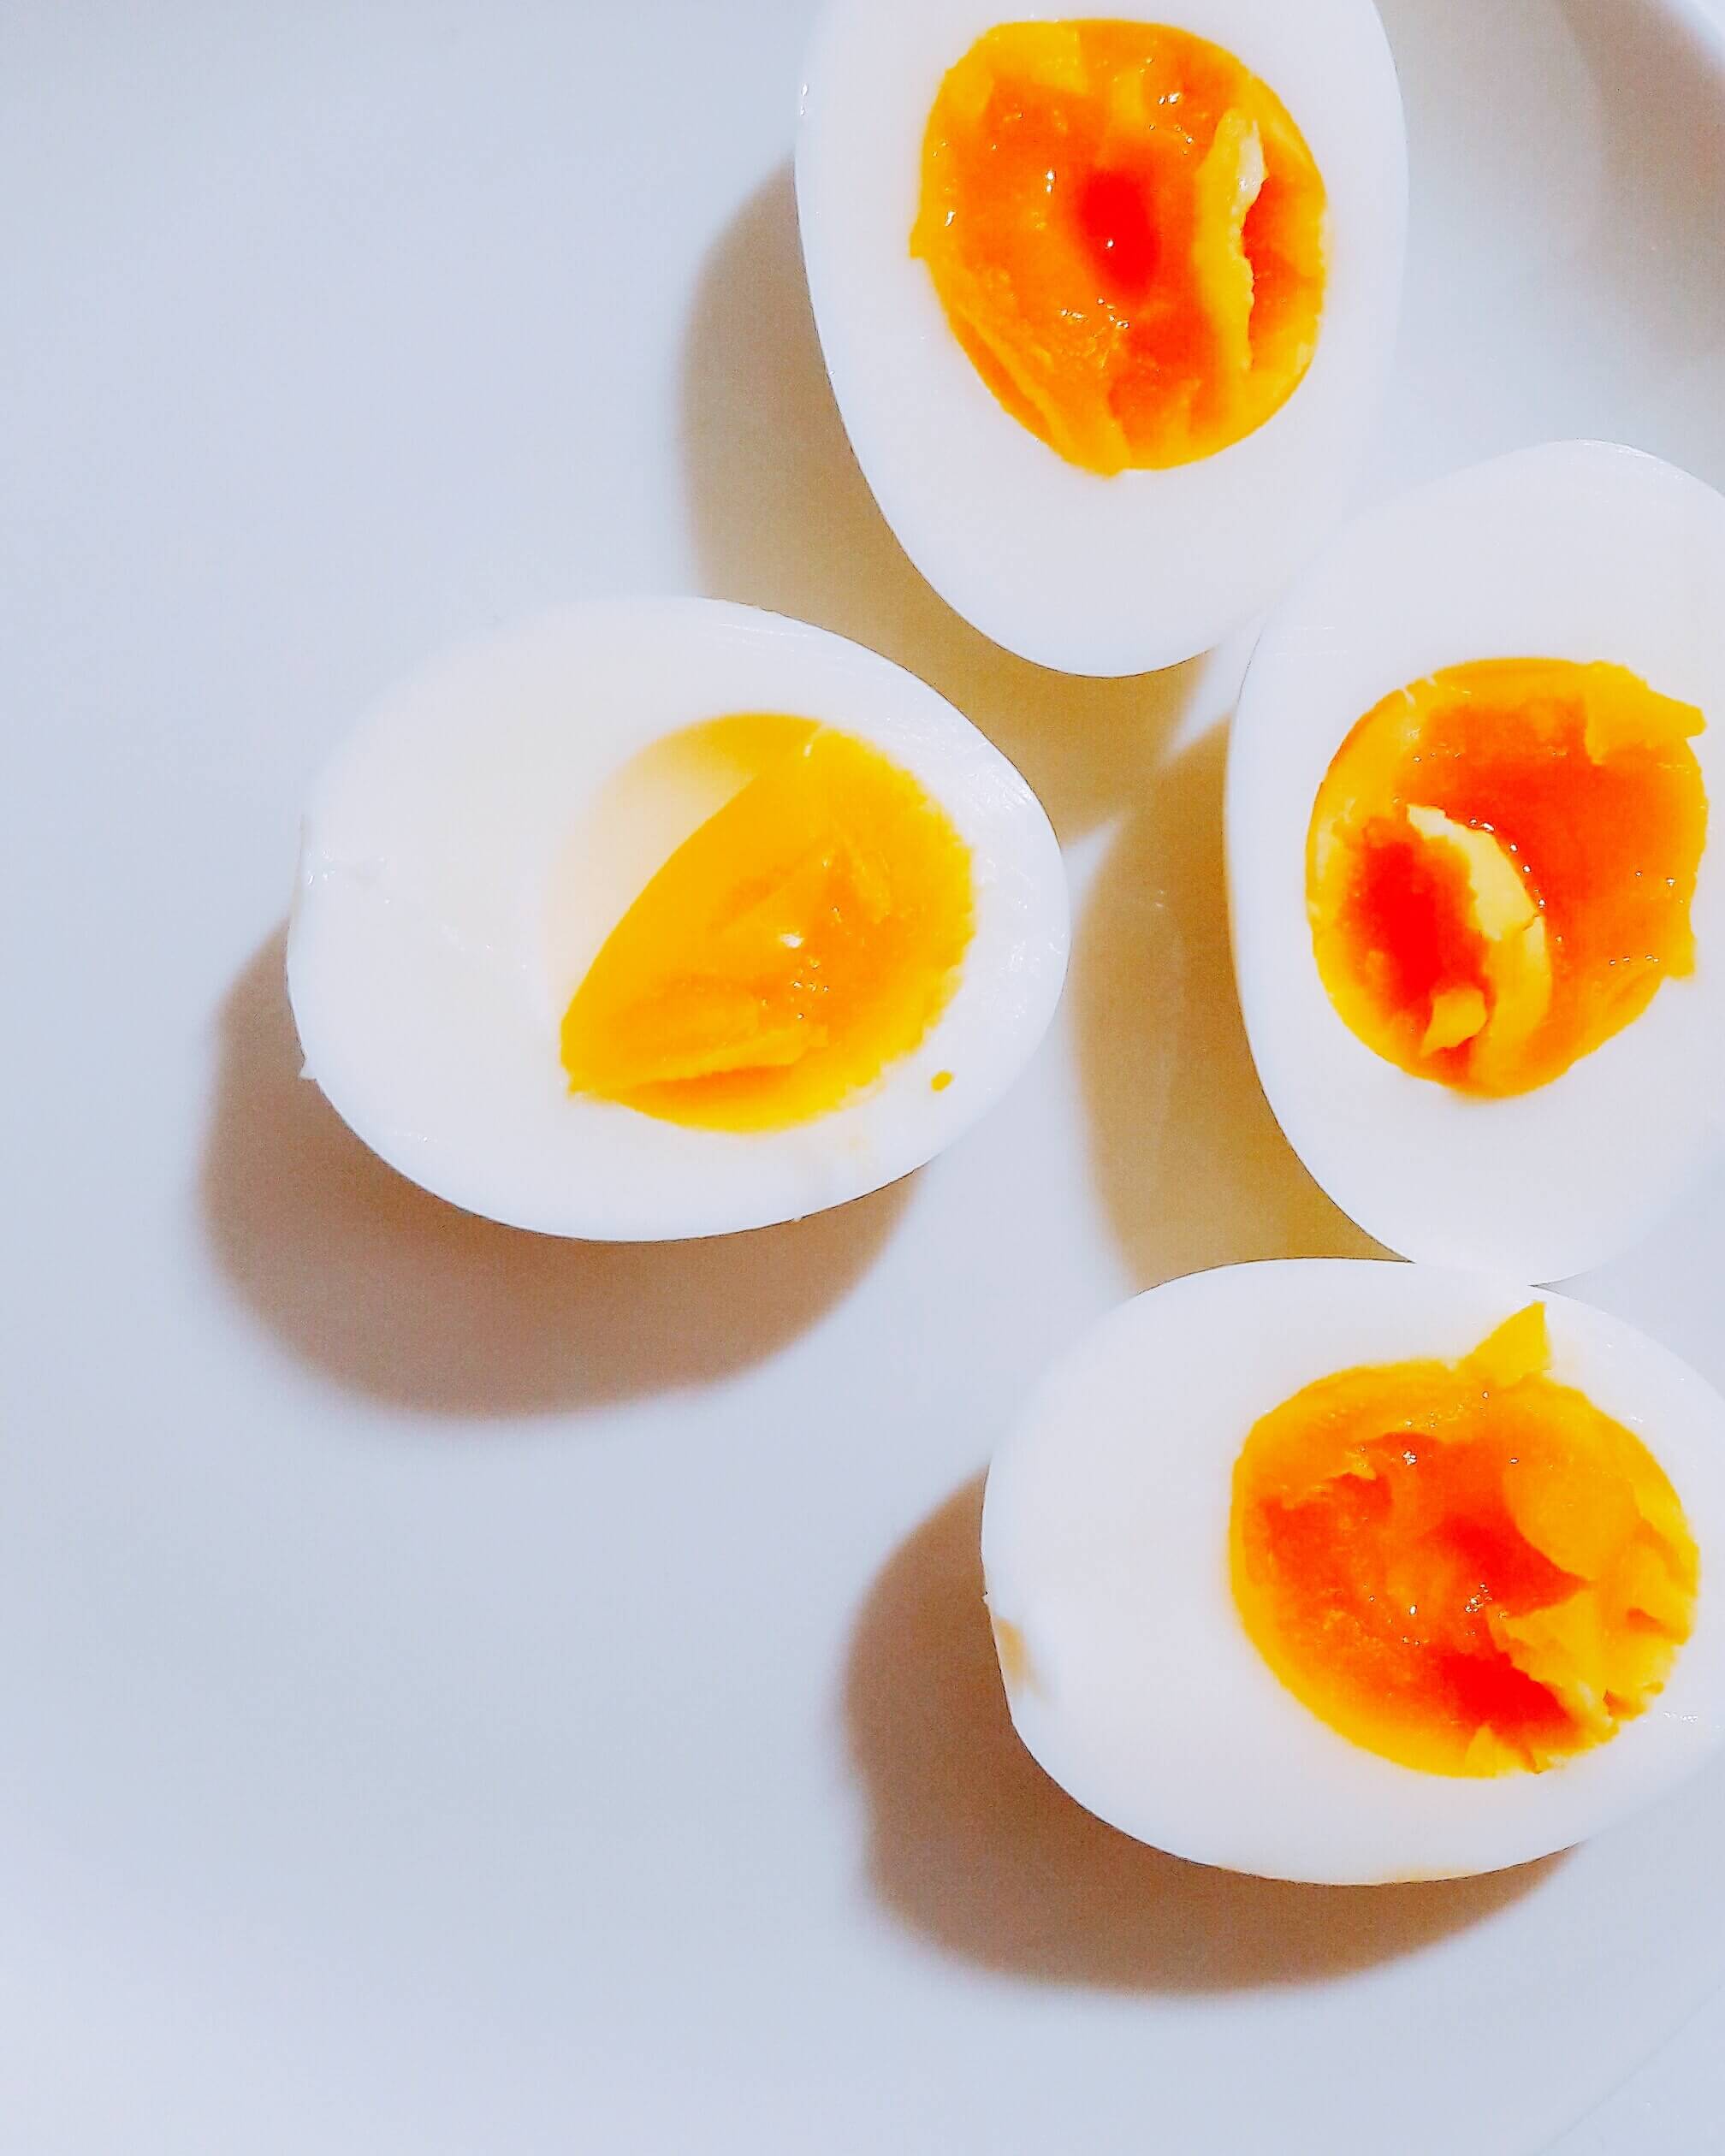 how long to soft boil an egg